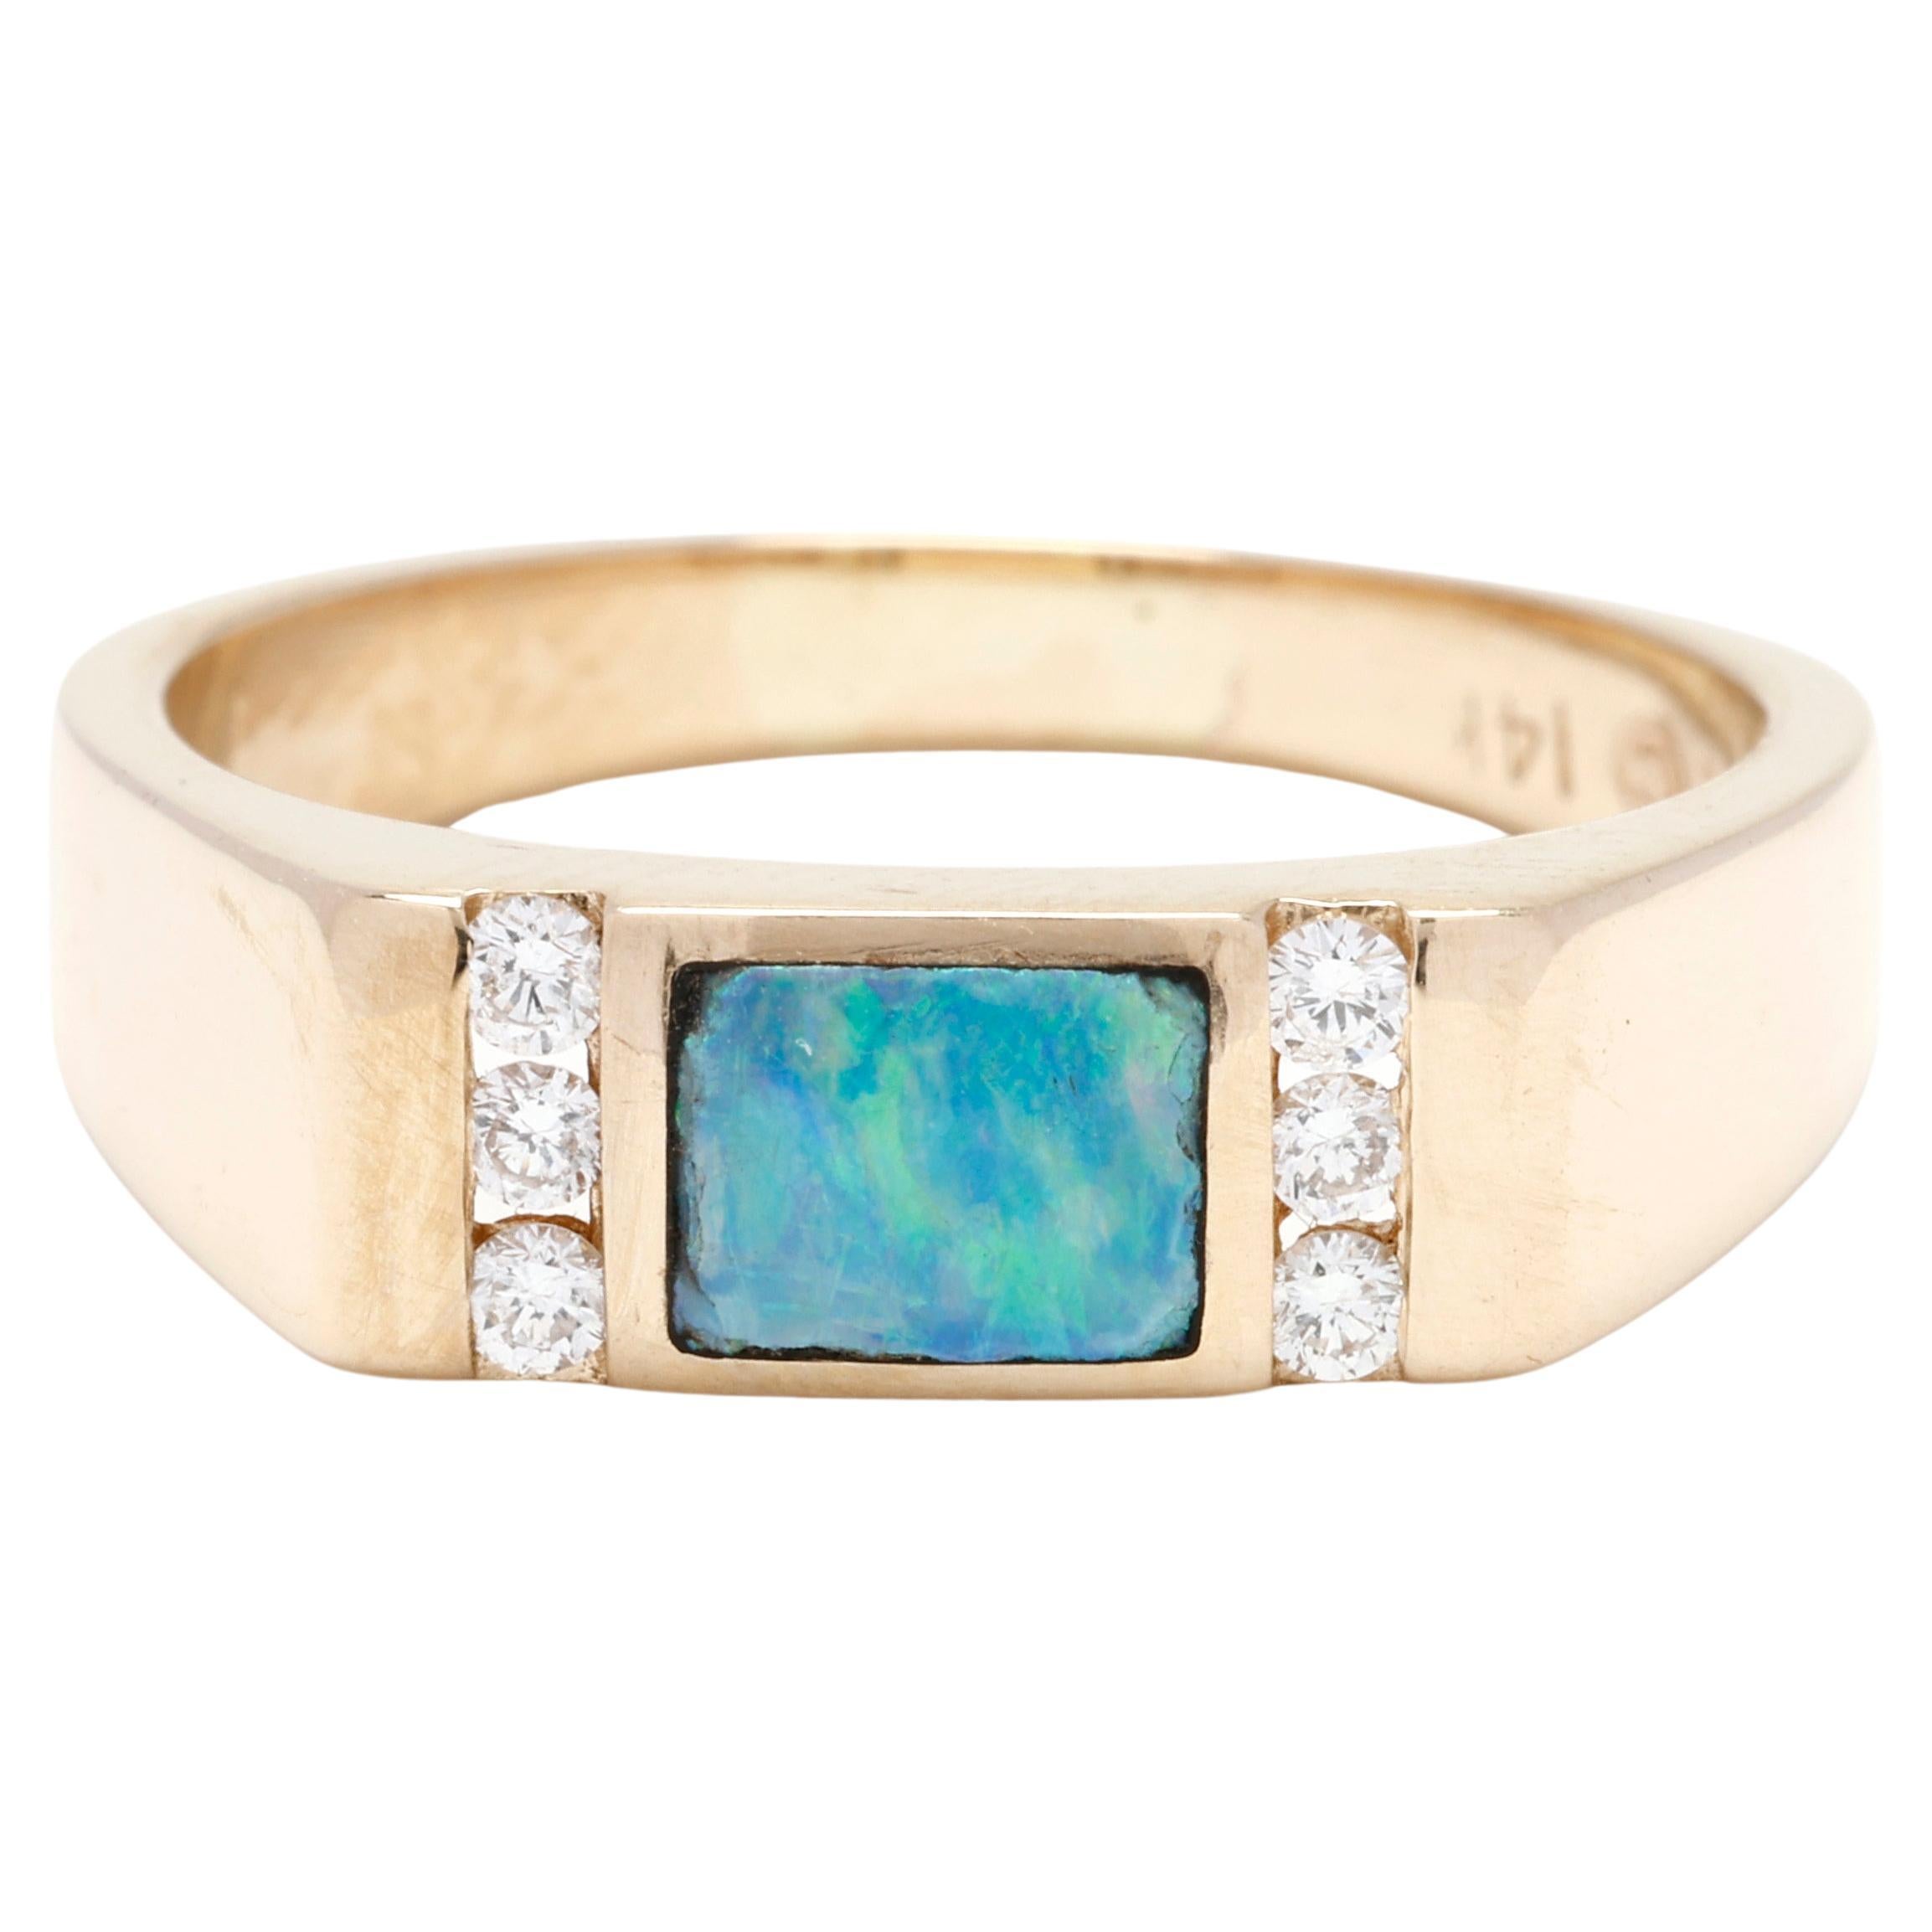 Rainbow Opal and Diamond Rectangular Band Ring, 14k Yellow Gold, Ring Size 6.75 For Sale